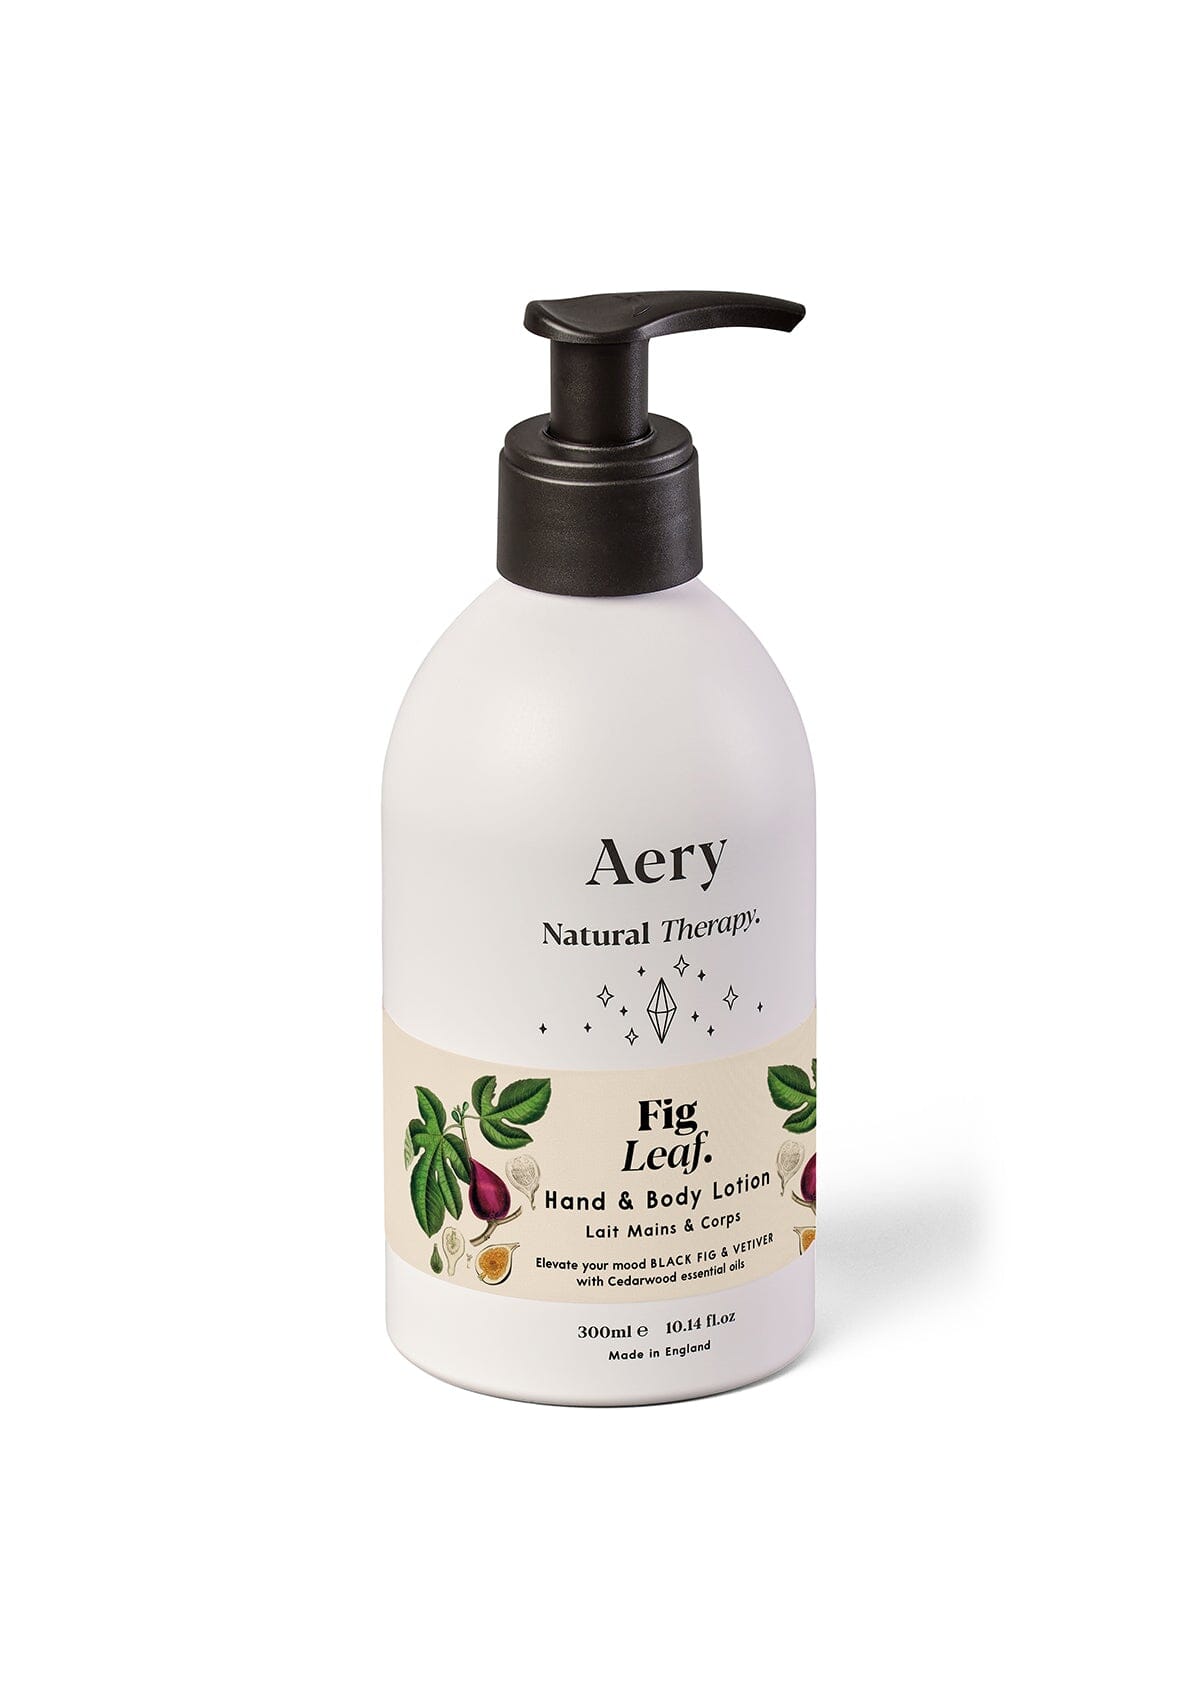 Cream Fig Leaf Hand and Body Lotion by Aery displayed on white background